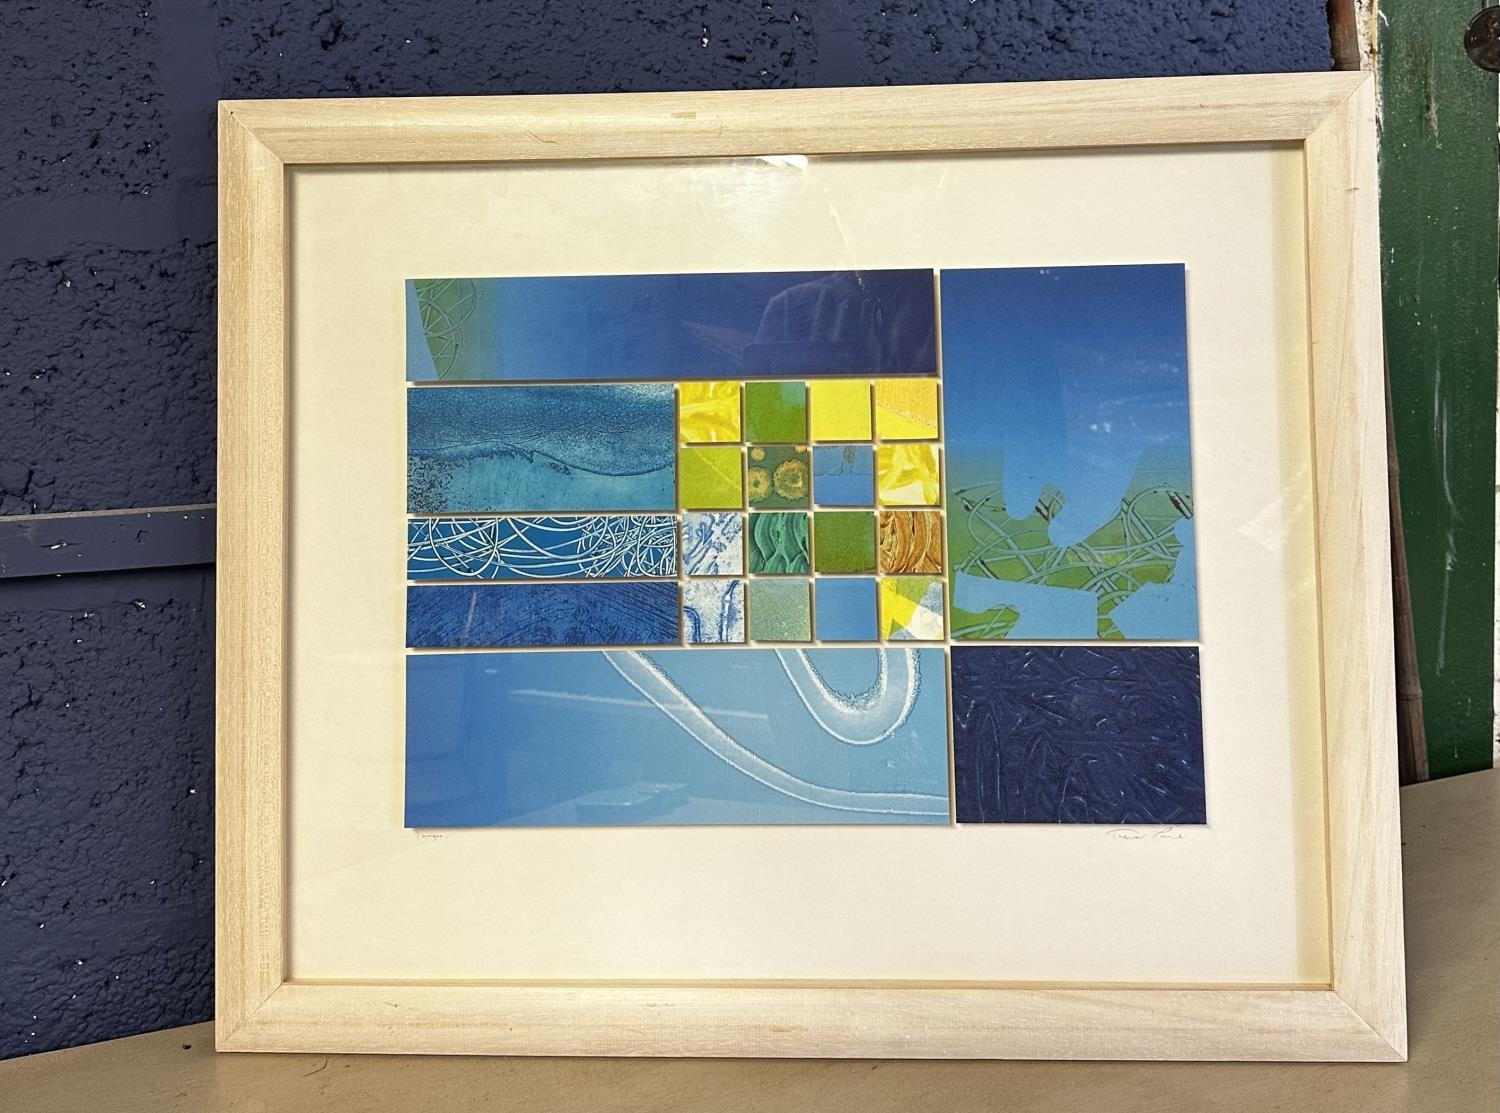 Contemporary abstract framed and glazed picture, signed in pencil Trevor Price , 35cm x 50cm